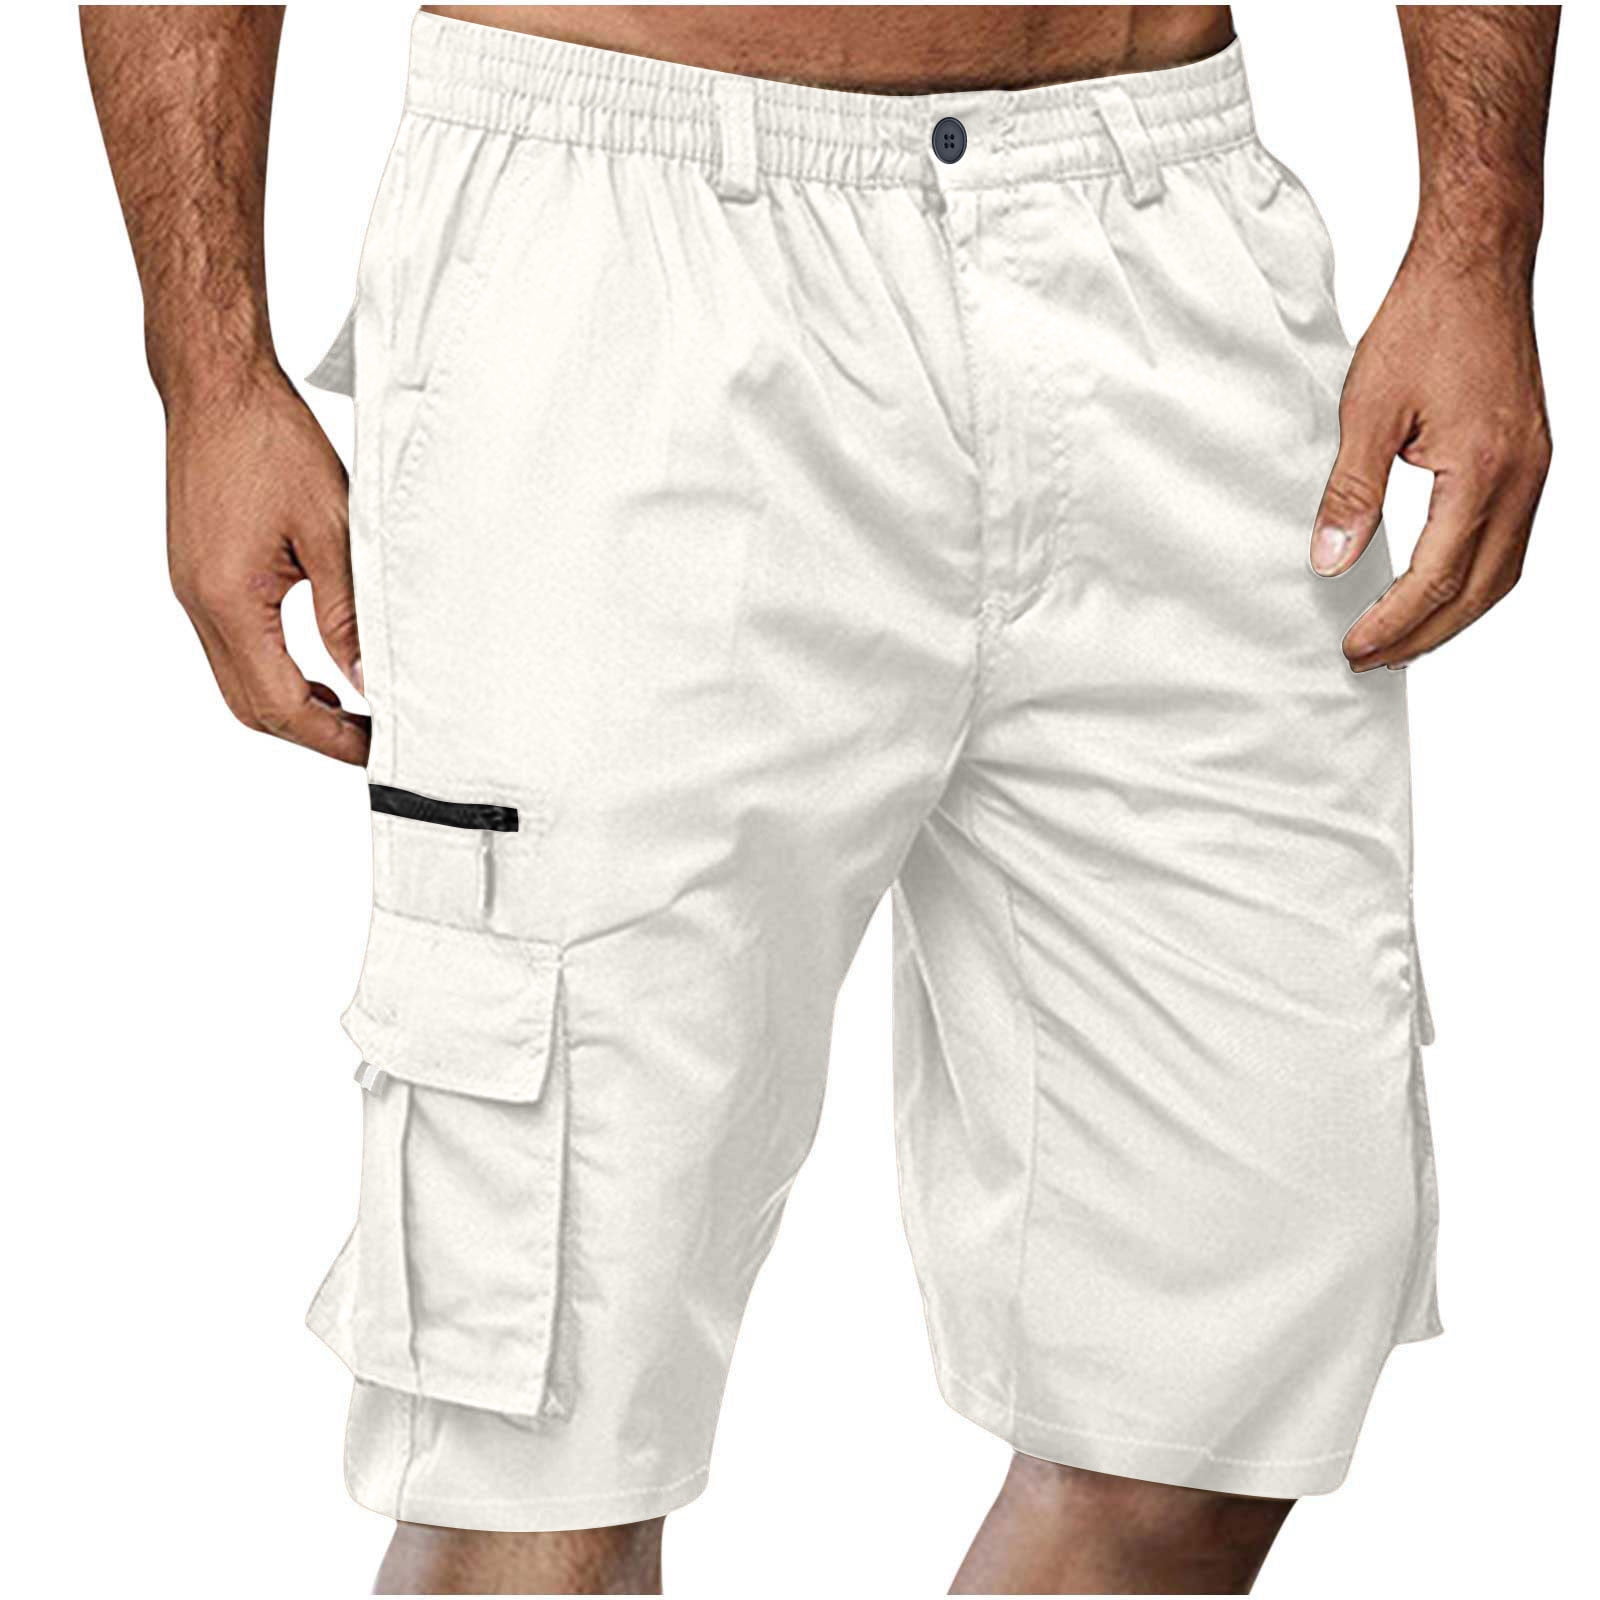 CaComMARK PI Men's Shorts Clearance Men Casual Solid Color Knee Length ...